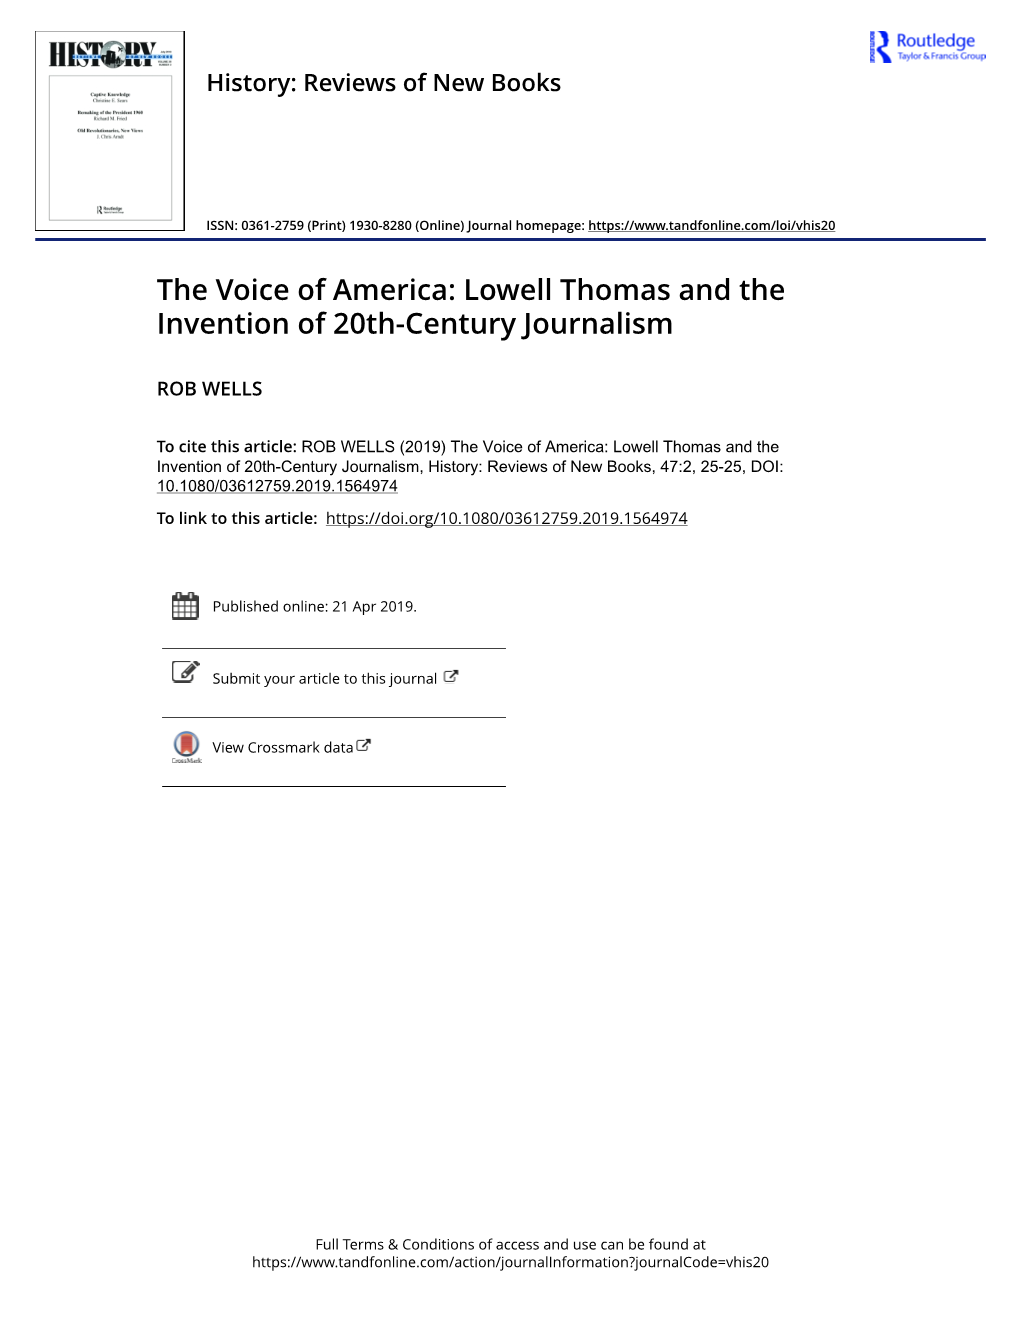 Lowell Thomas and the Invention of 20Th-Century Journalism